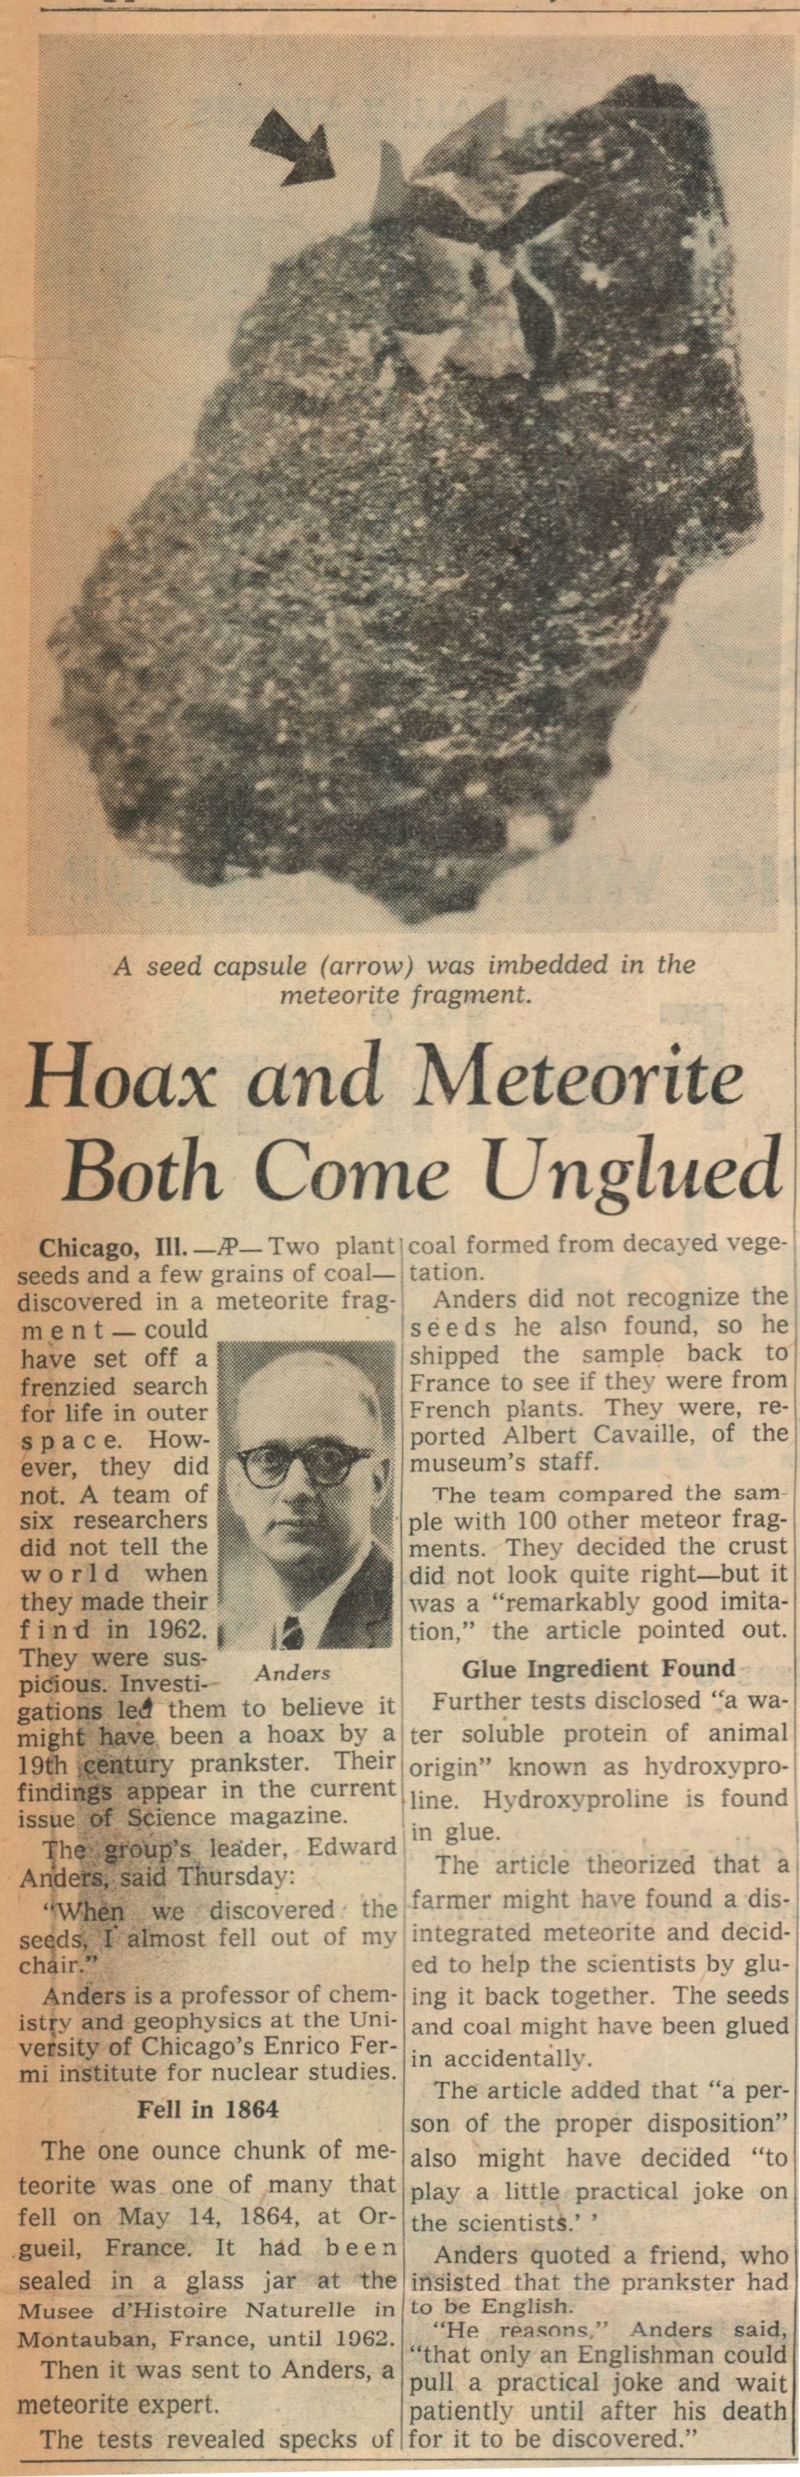 Hoax and Meteorite Both Come Unglued (The Milwaukee Journal, 27 Nov 1964)